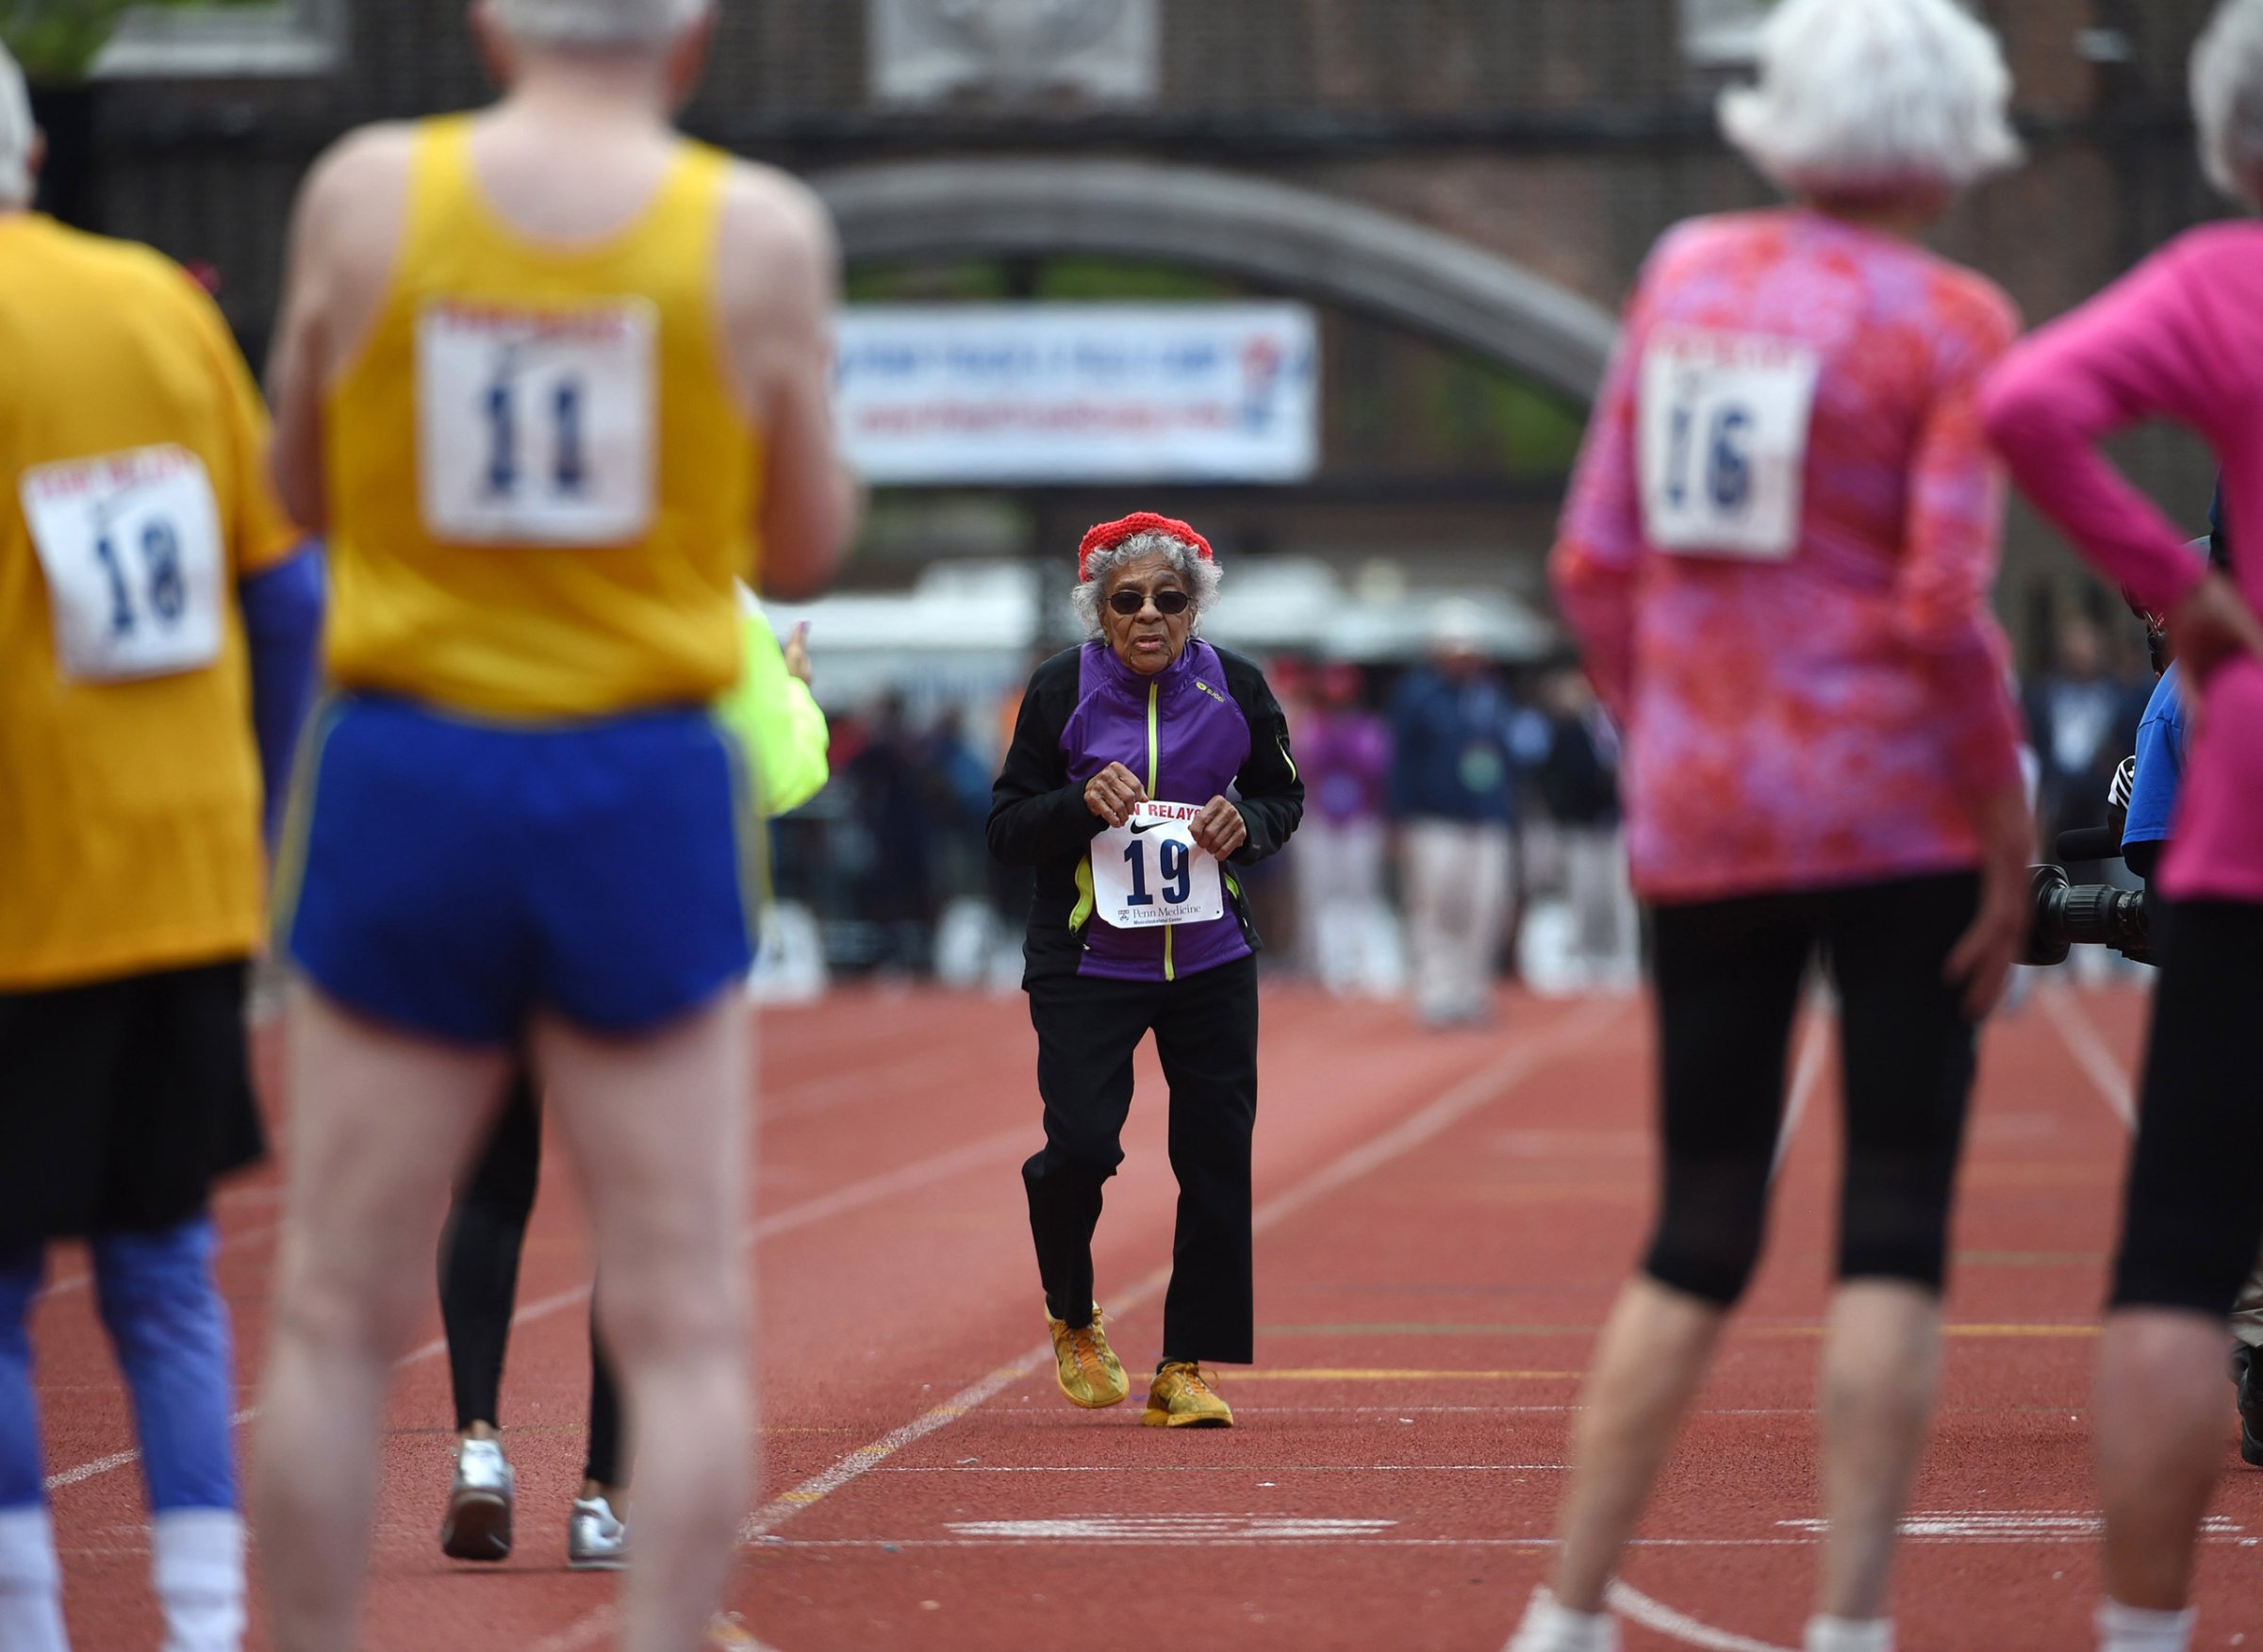 Ida Keeling (age 100) runs in the mixed masters age 80 and over 100m during the 122nd Penn Relays at Franklin Field in Philadelphia, PA, April 30, 2016.